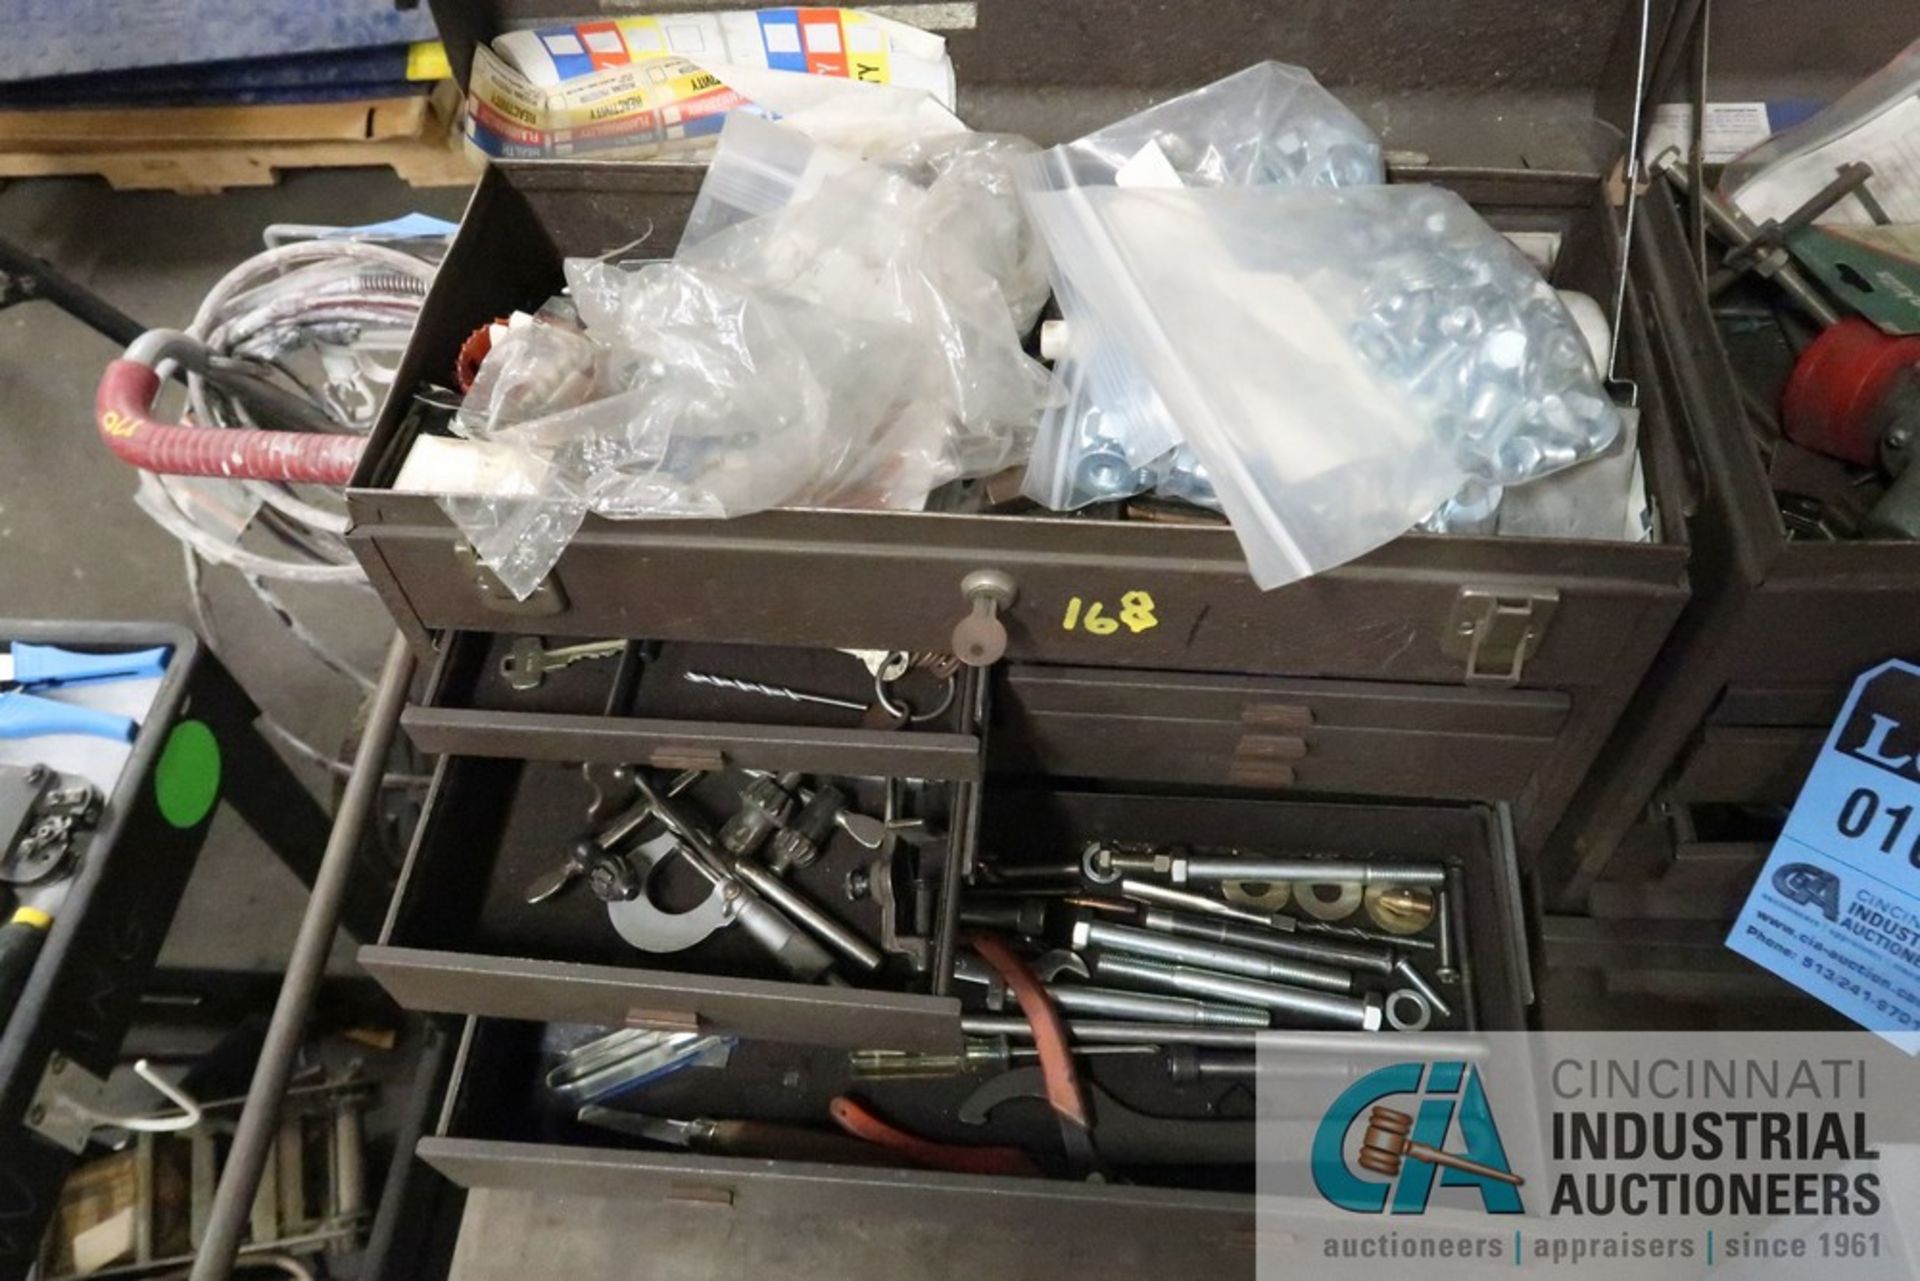 KENNEDY TOOLBOXES WITH TOOLS, DRILL INDEX, HEAVY DUTY ROLLING CART - Image 4 of 5